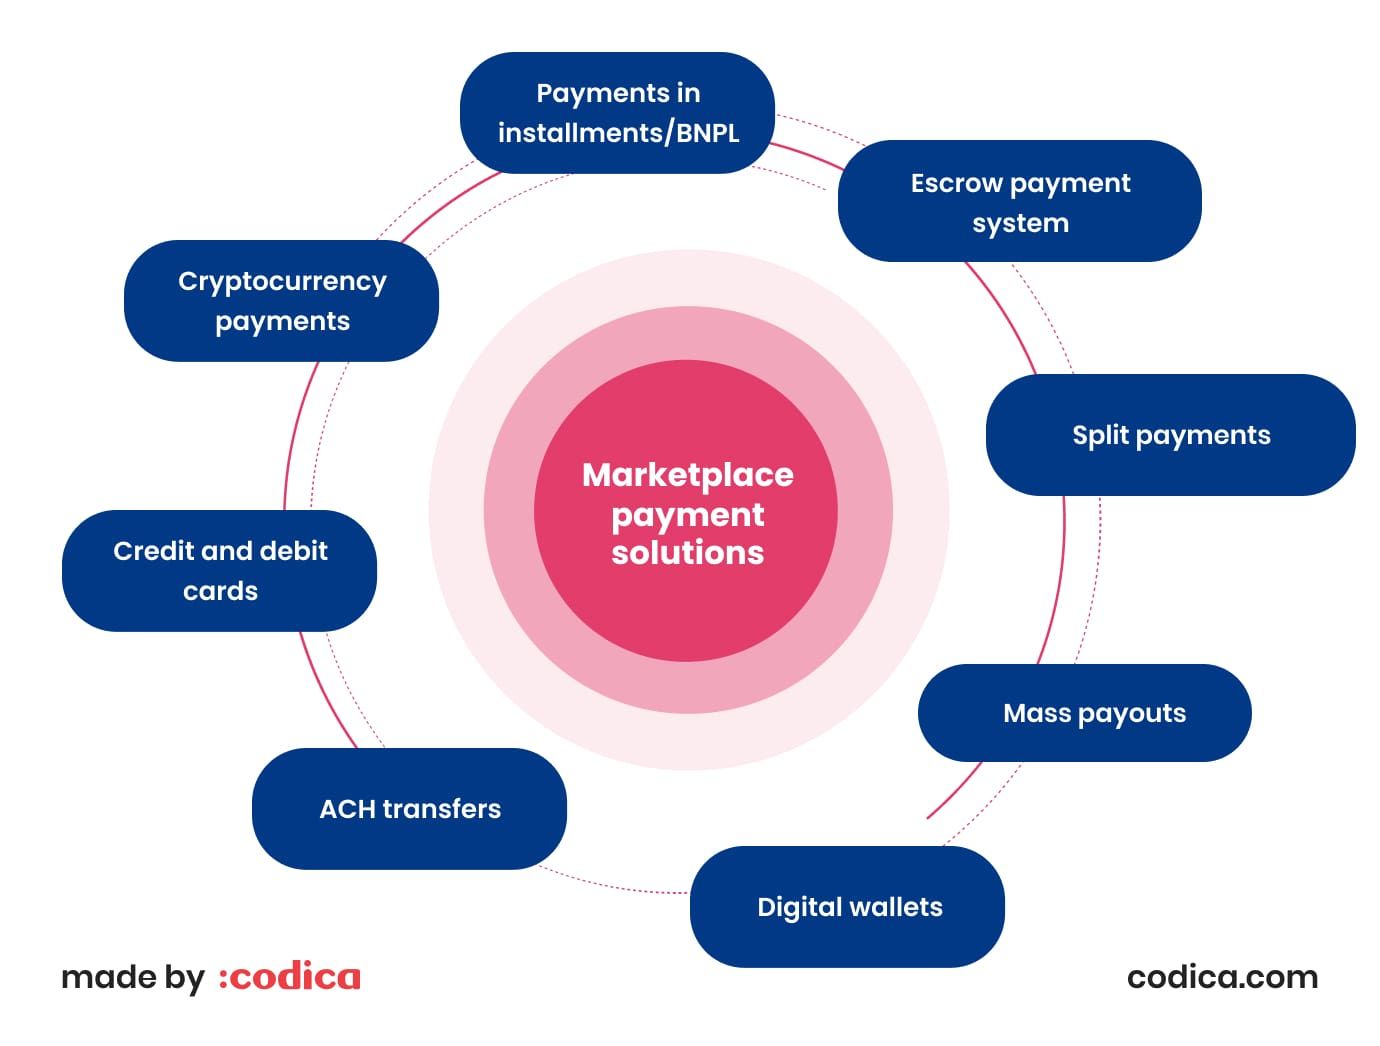 Marketplace payment solutions